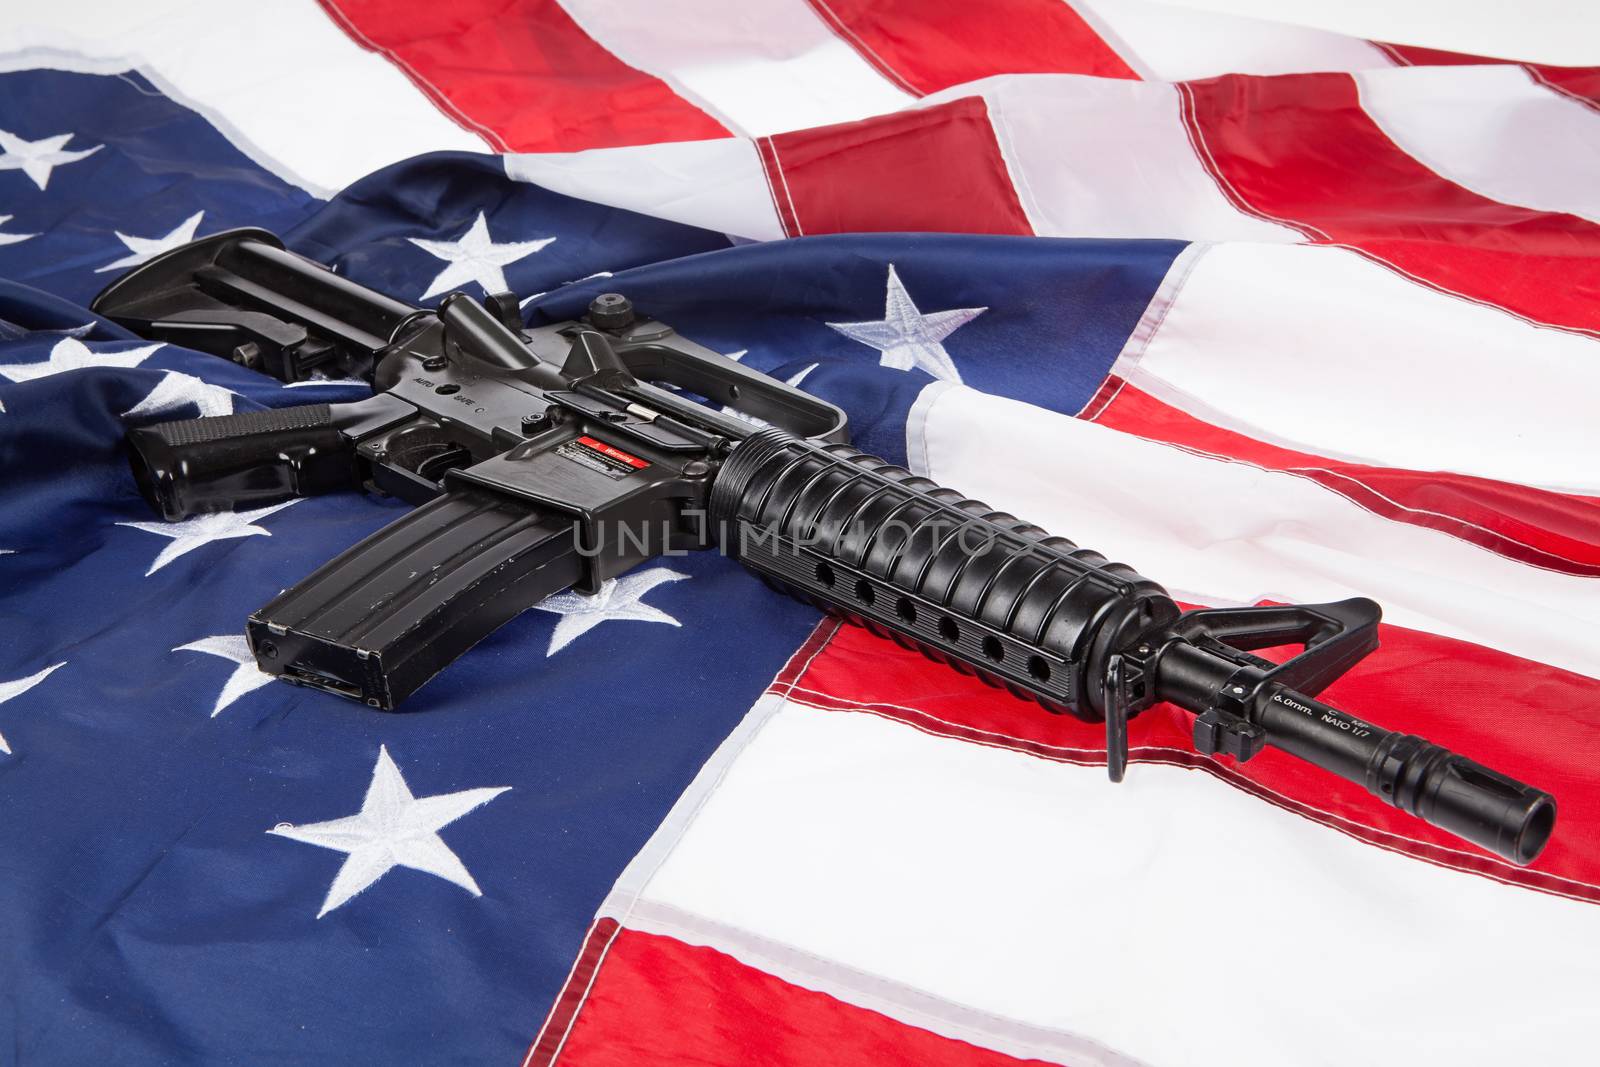 Submachine gun on an American flag with stars and stripes